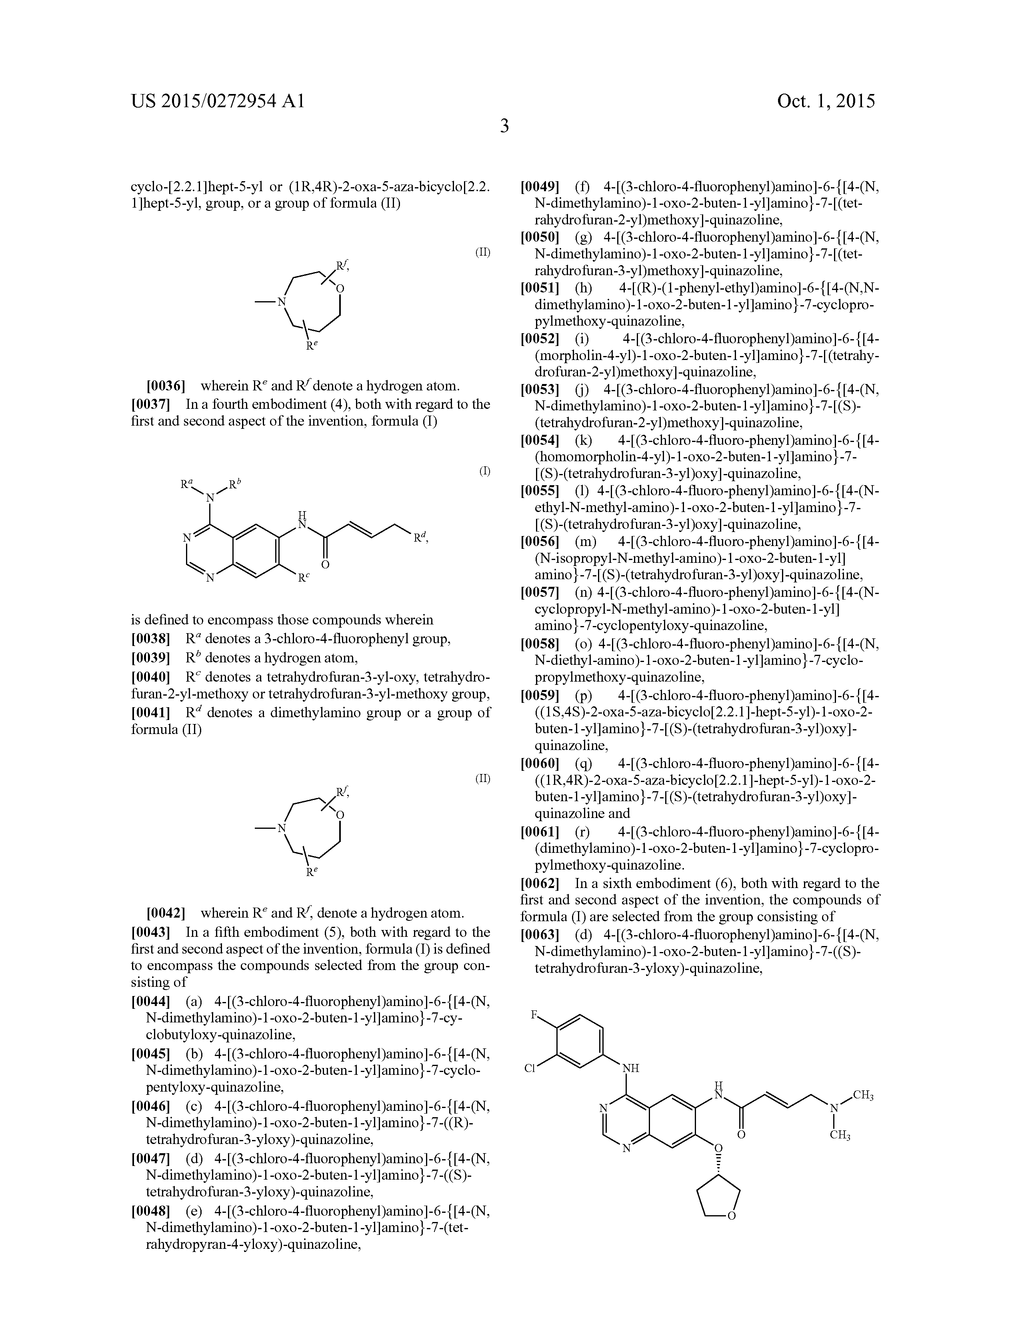 QUINAZOLINE DERIVATIVES FOR THE TREATMENT OF CANCER DISEASES - diagram, schematic, and image 08